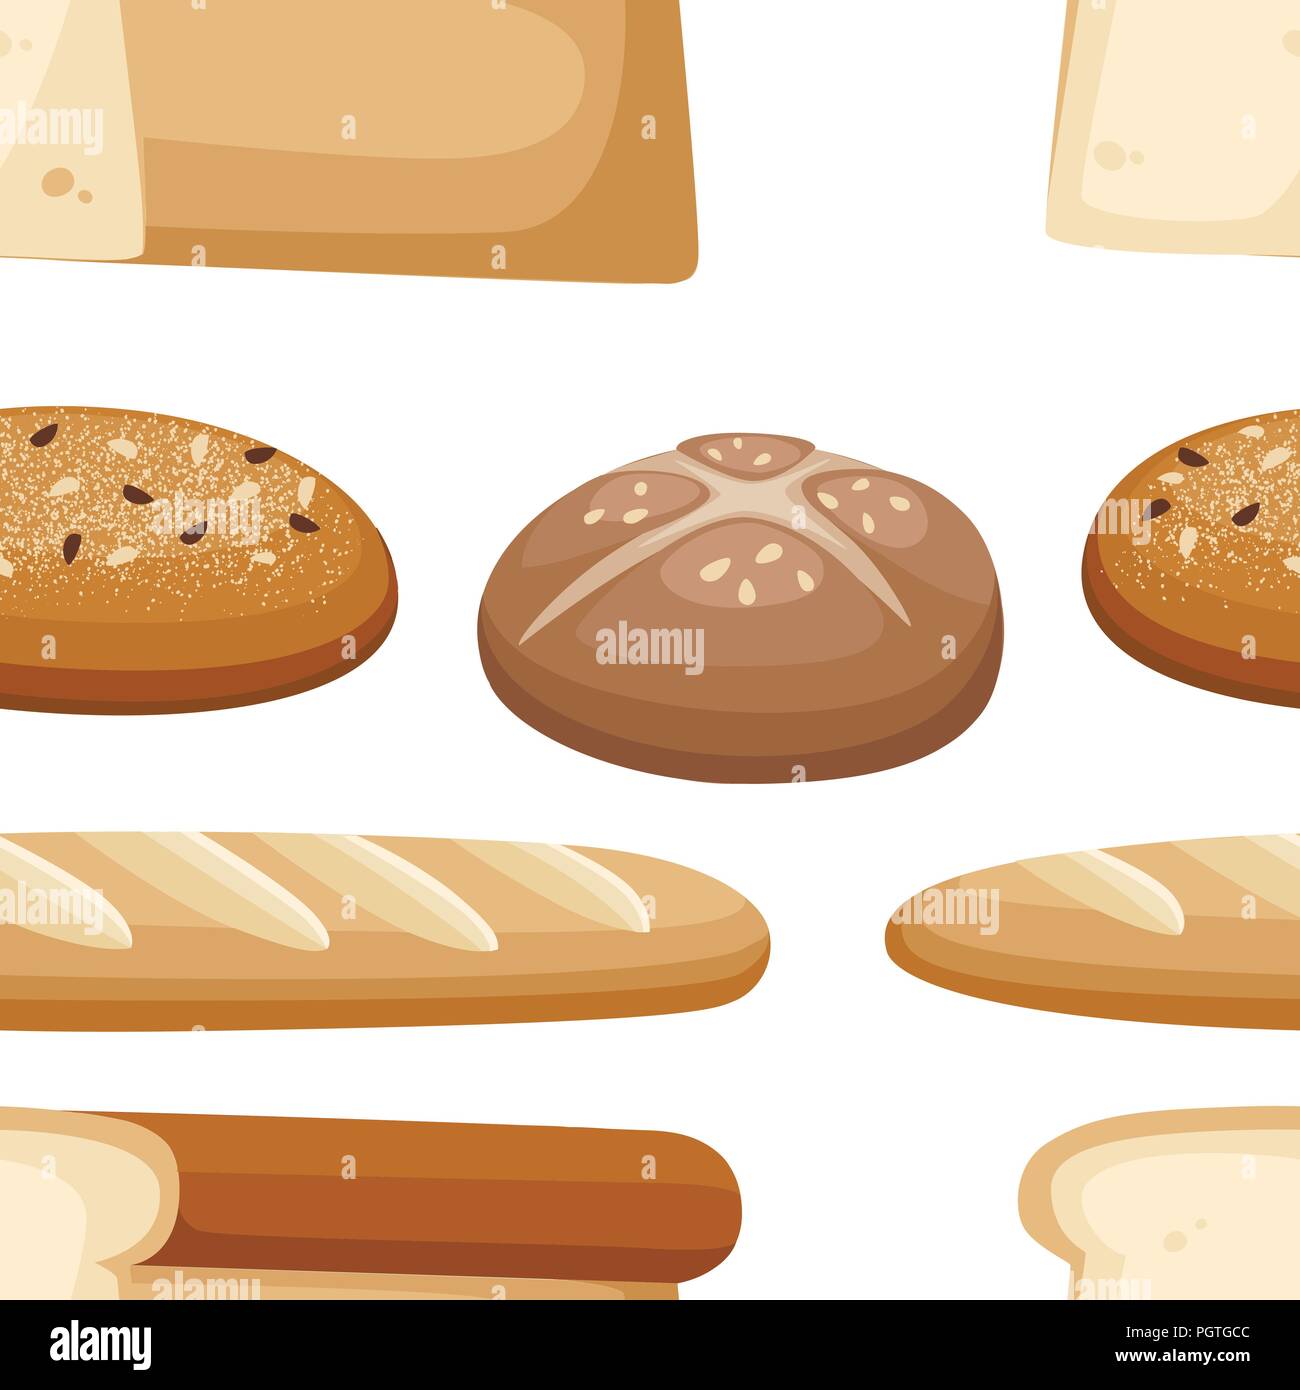 Seamless pattern. Group of bakery bread. Wheat bread, french baguette, ciabatta, toast bread. Flat vector illustration on white background. Stock Vector